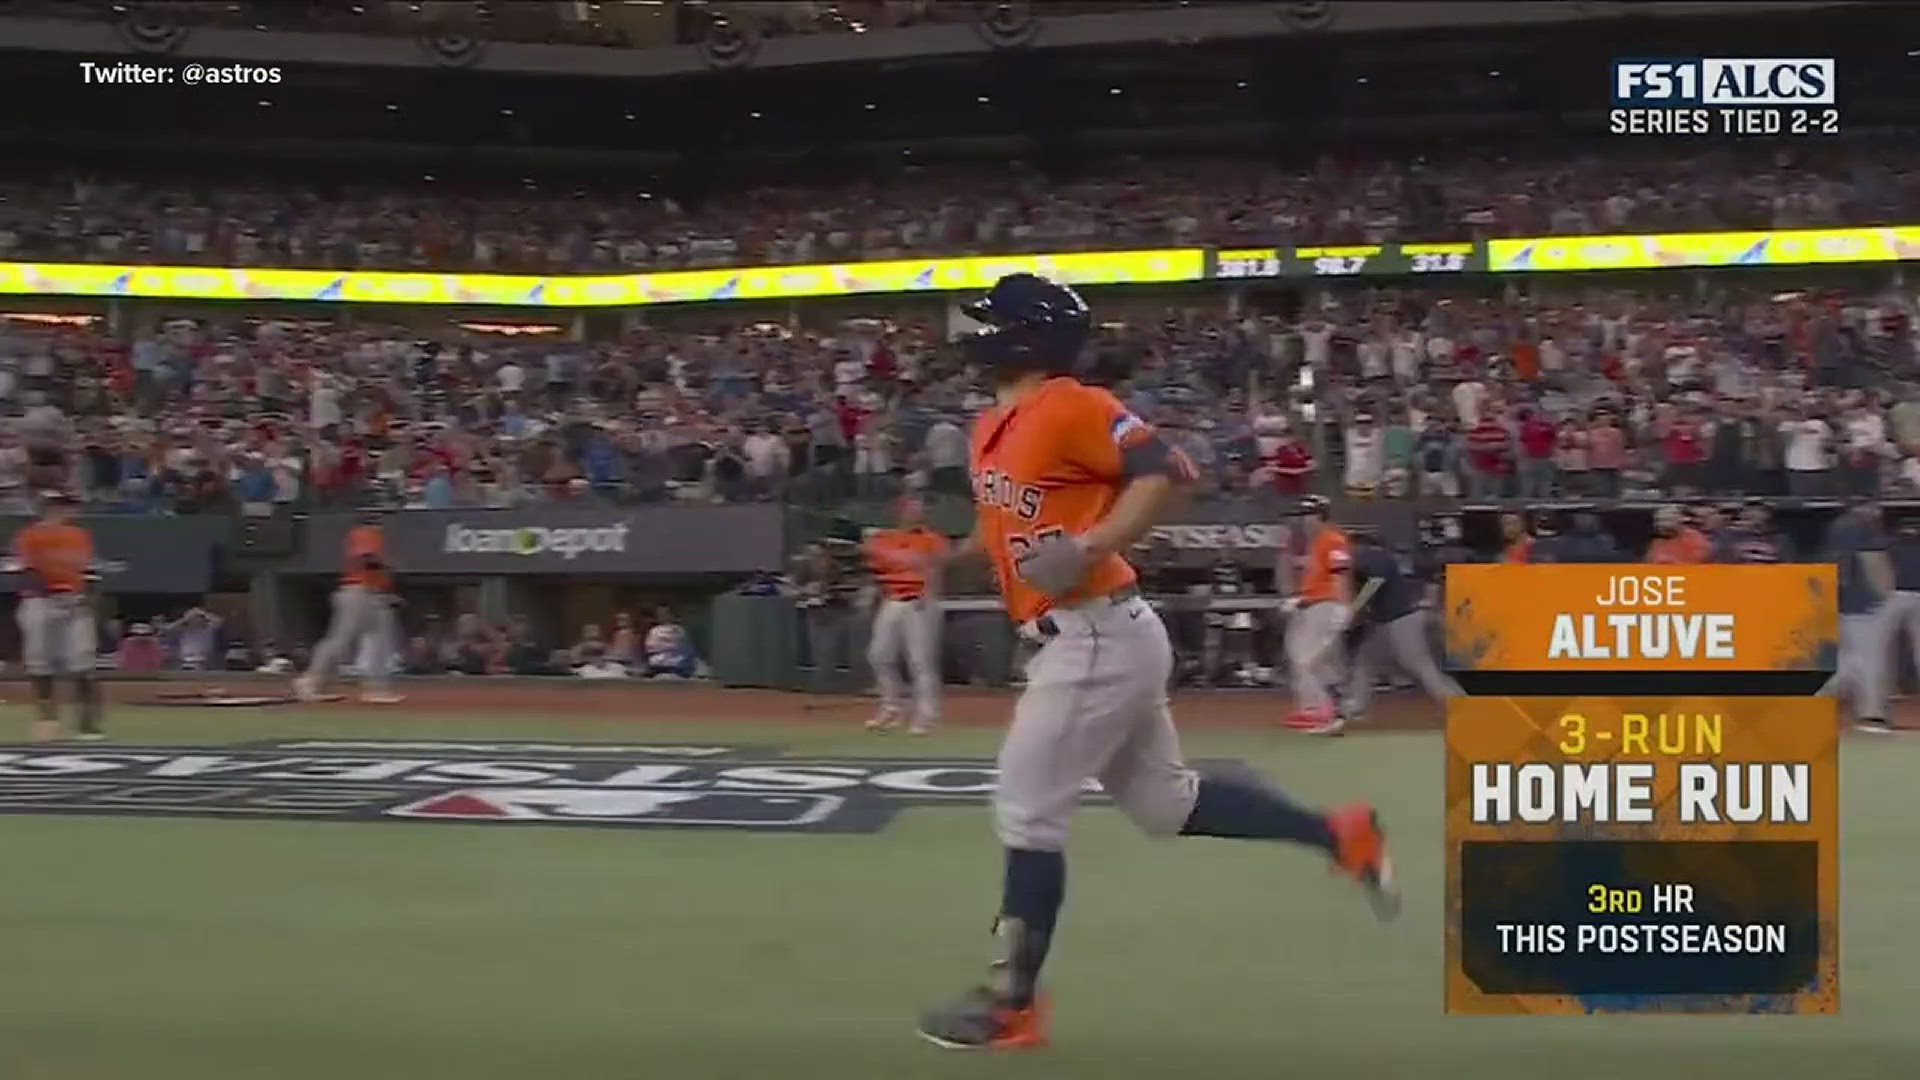 Houston Astros Altuve hit 3-run homer and secured victory